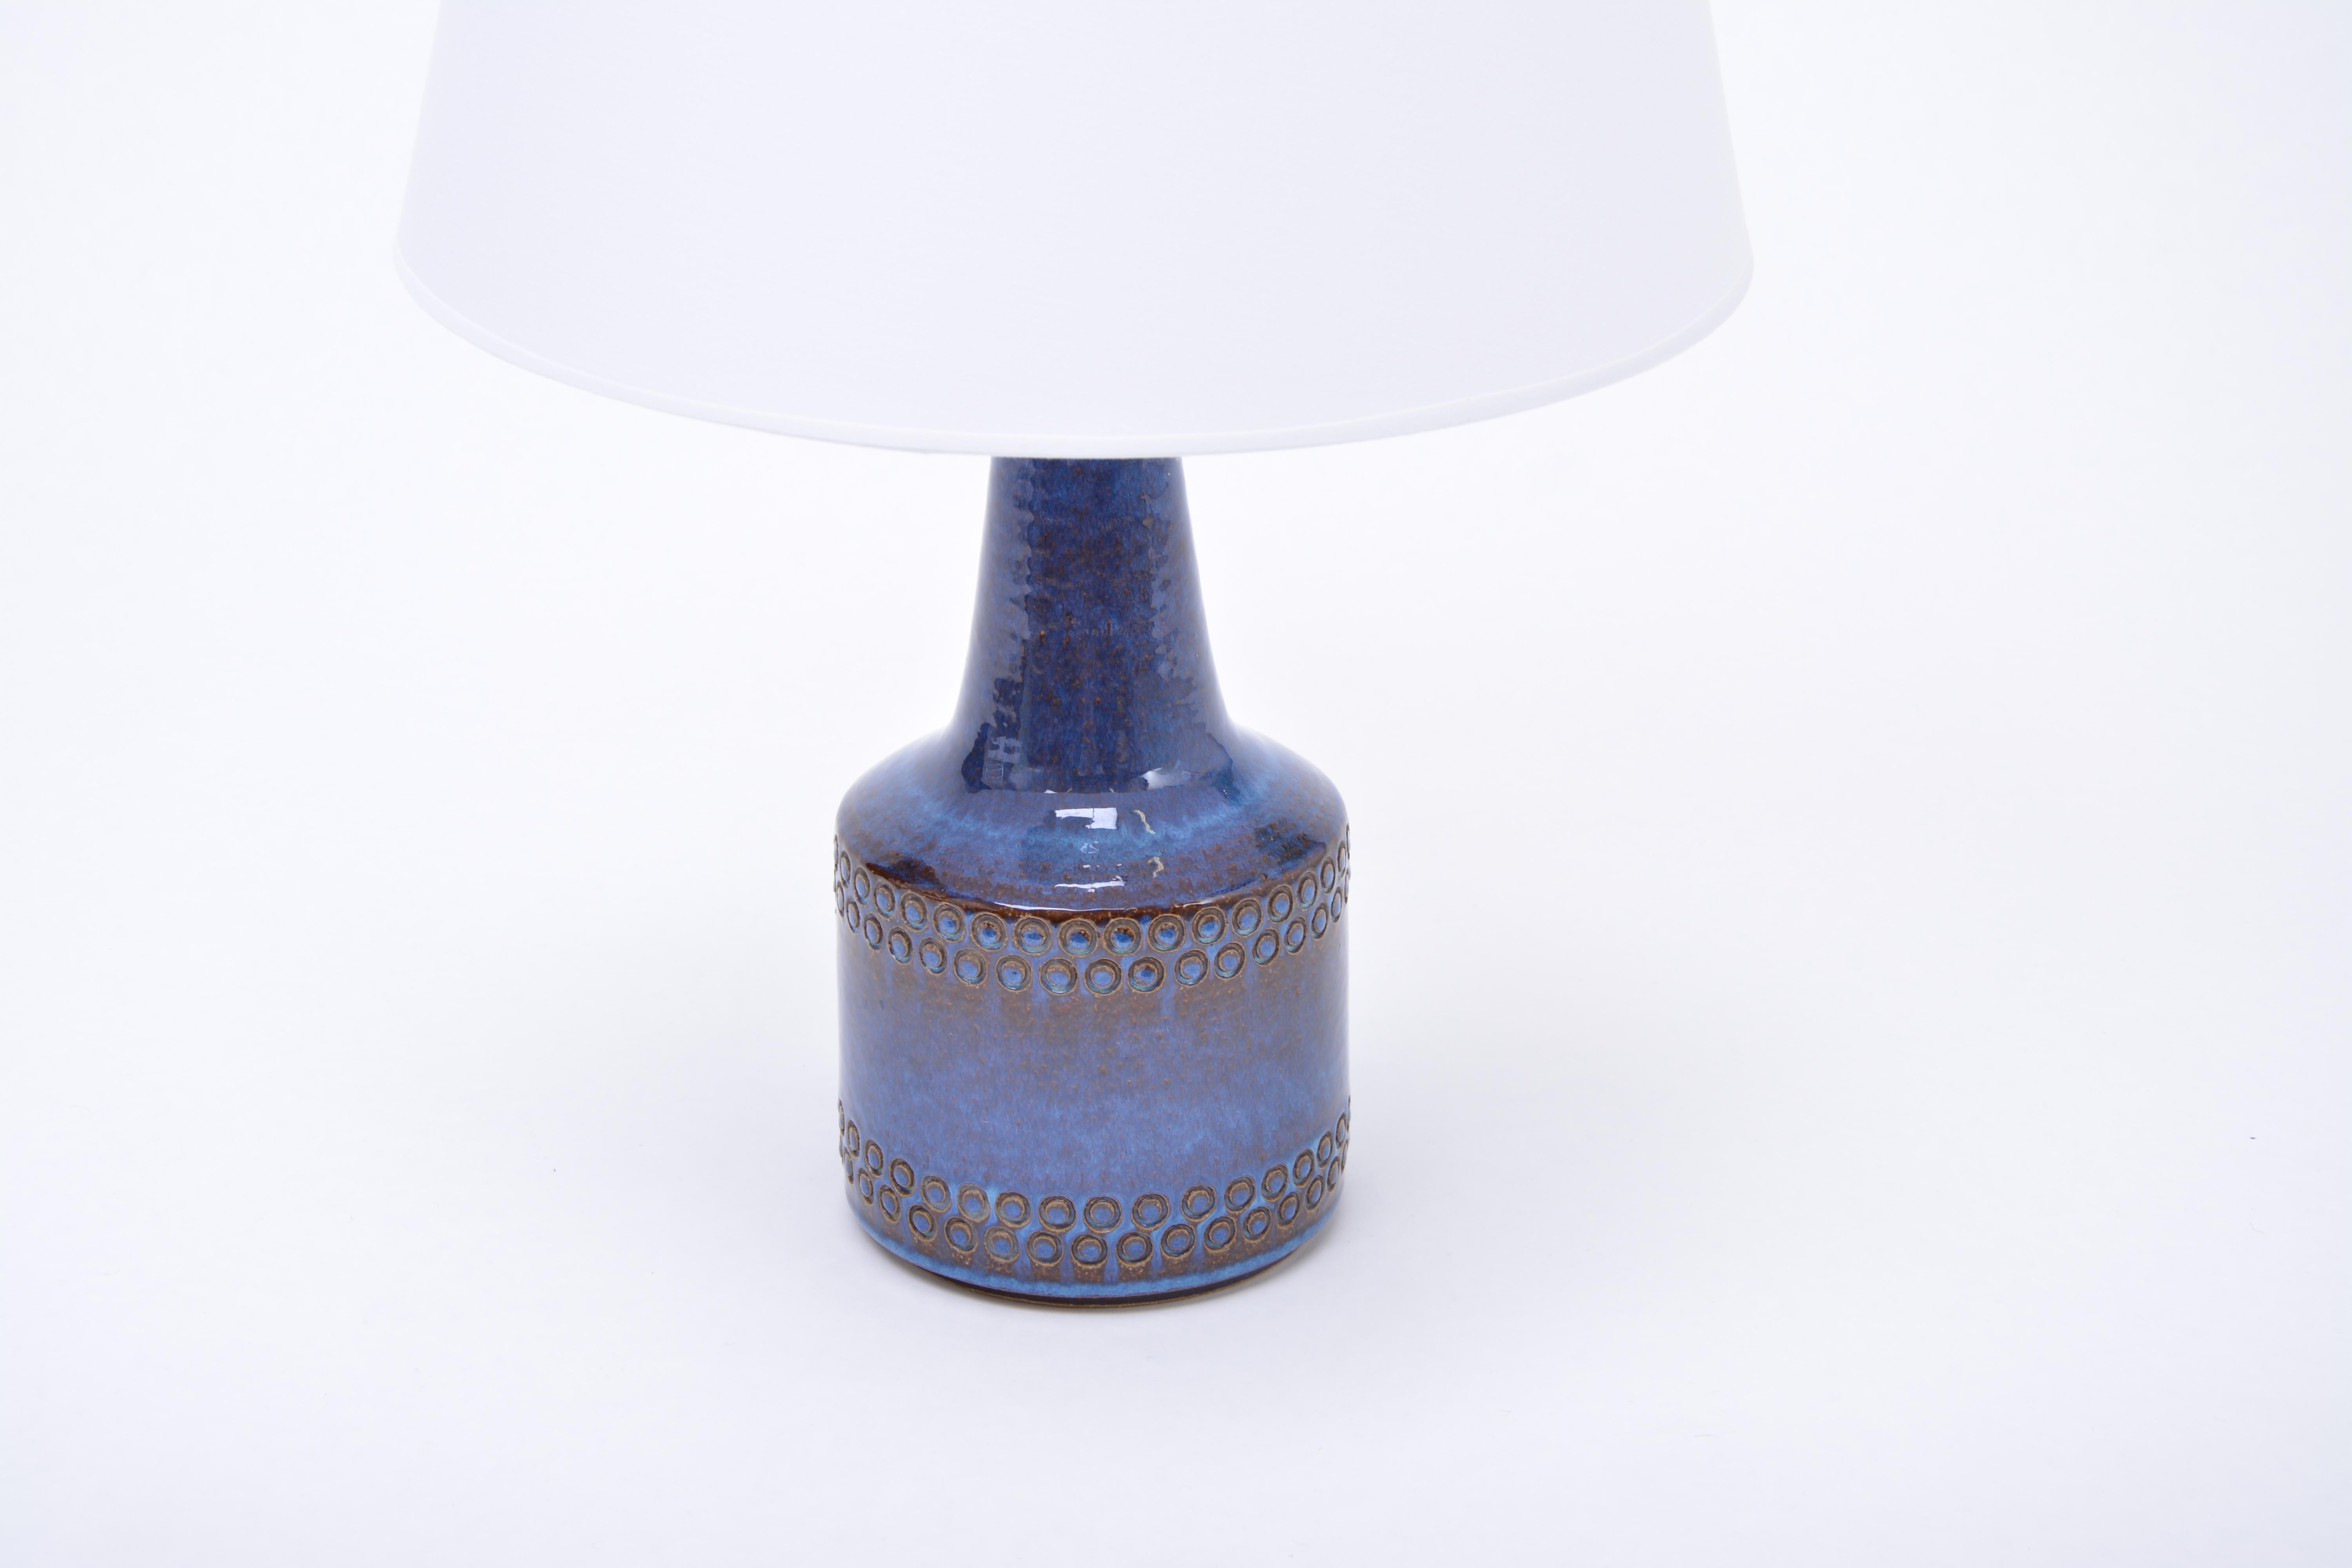 Handmade Blue Danish Mid-Century Modern Stoneware table lamp by Soholm

Table lamp made of stoneware with ceramic glazing in different tones of blue. Circular pattern to the base of the lamp. Produced by Danish company Soholm. The lamp has been